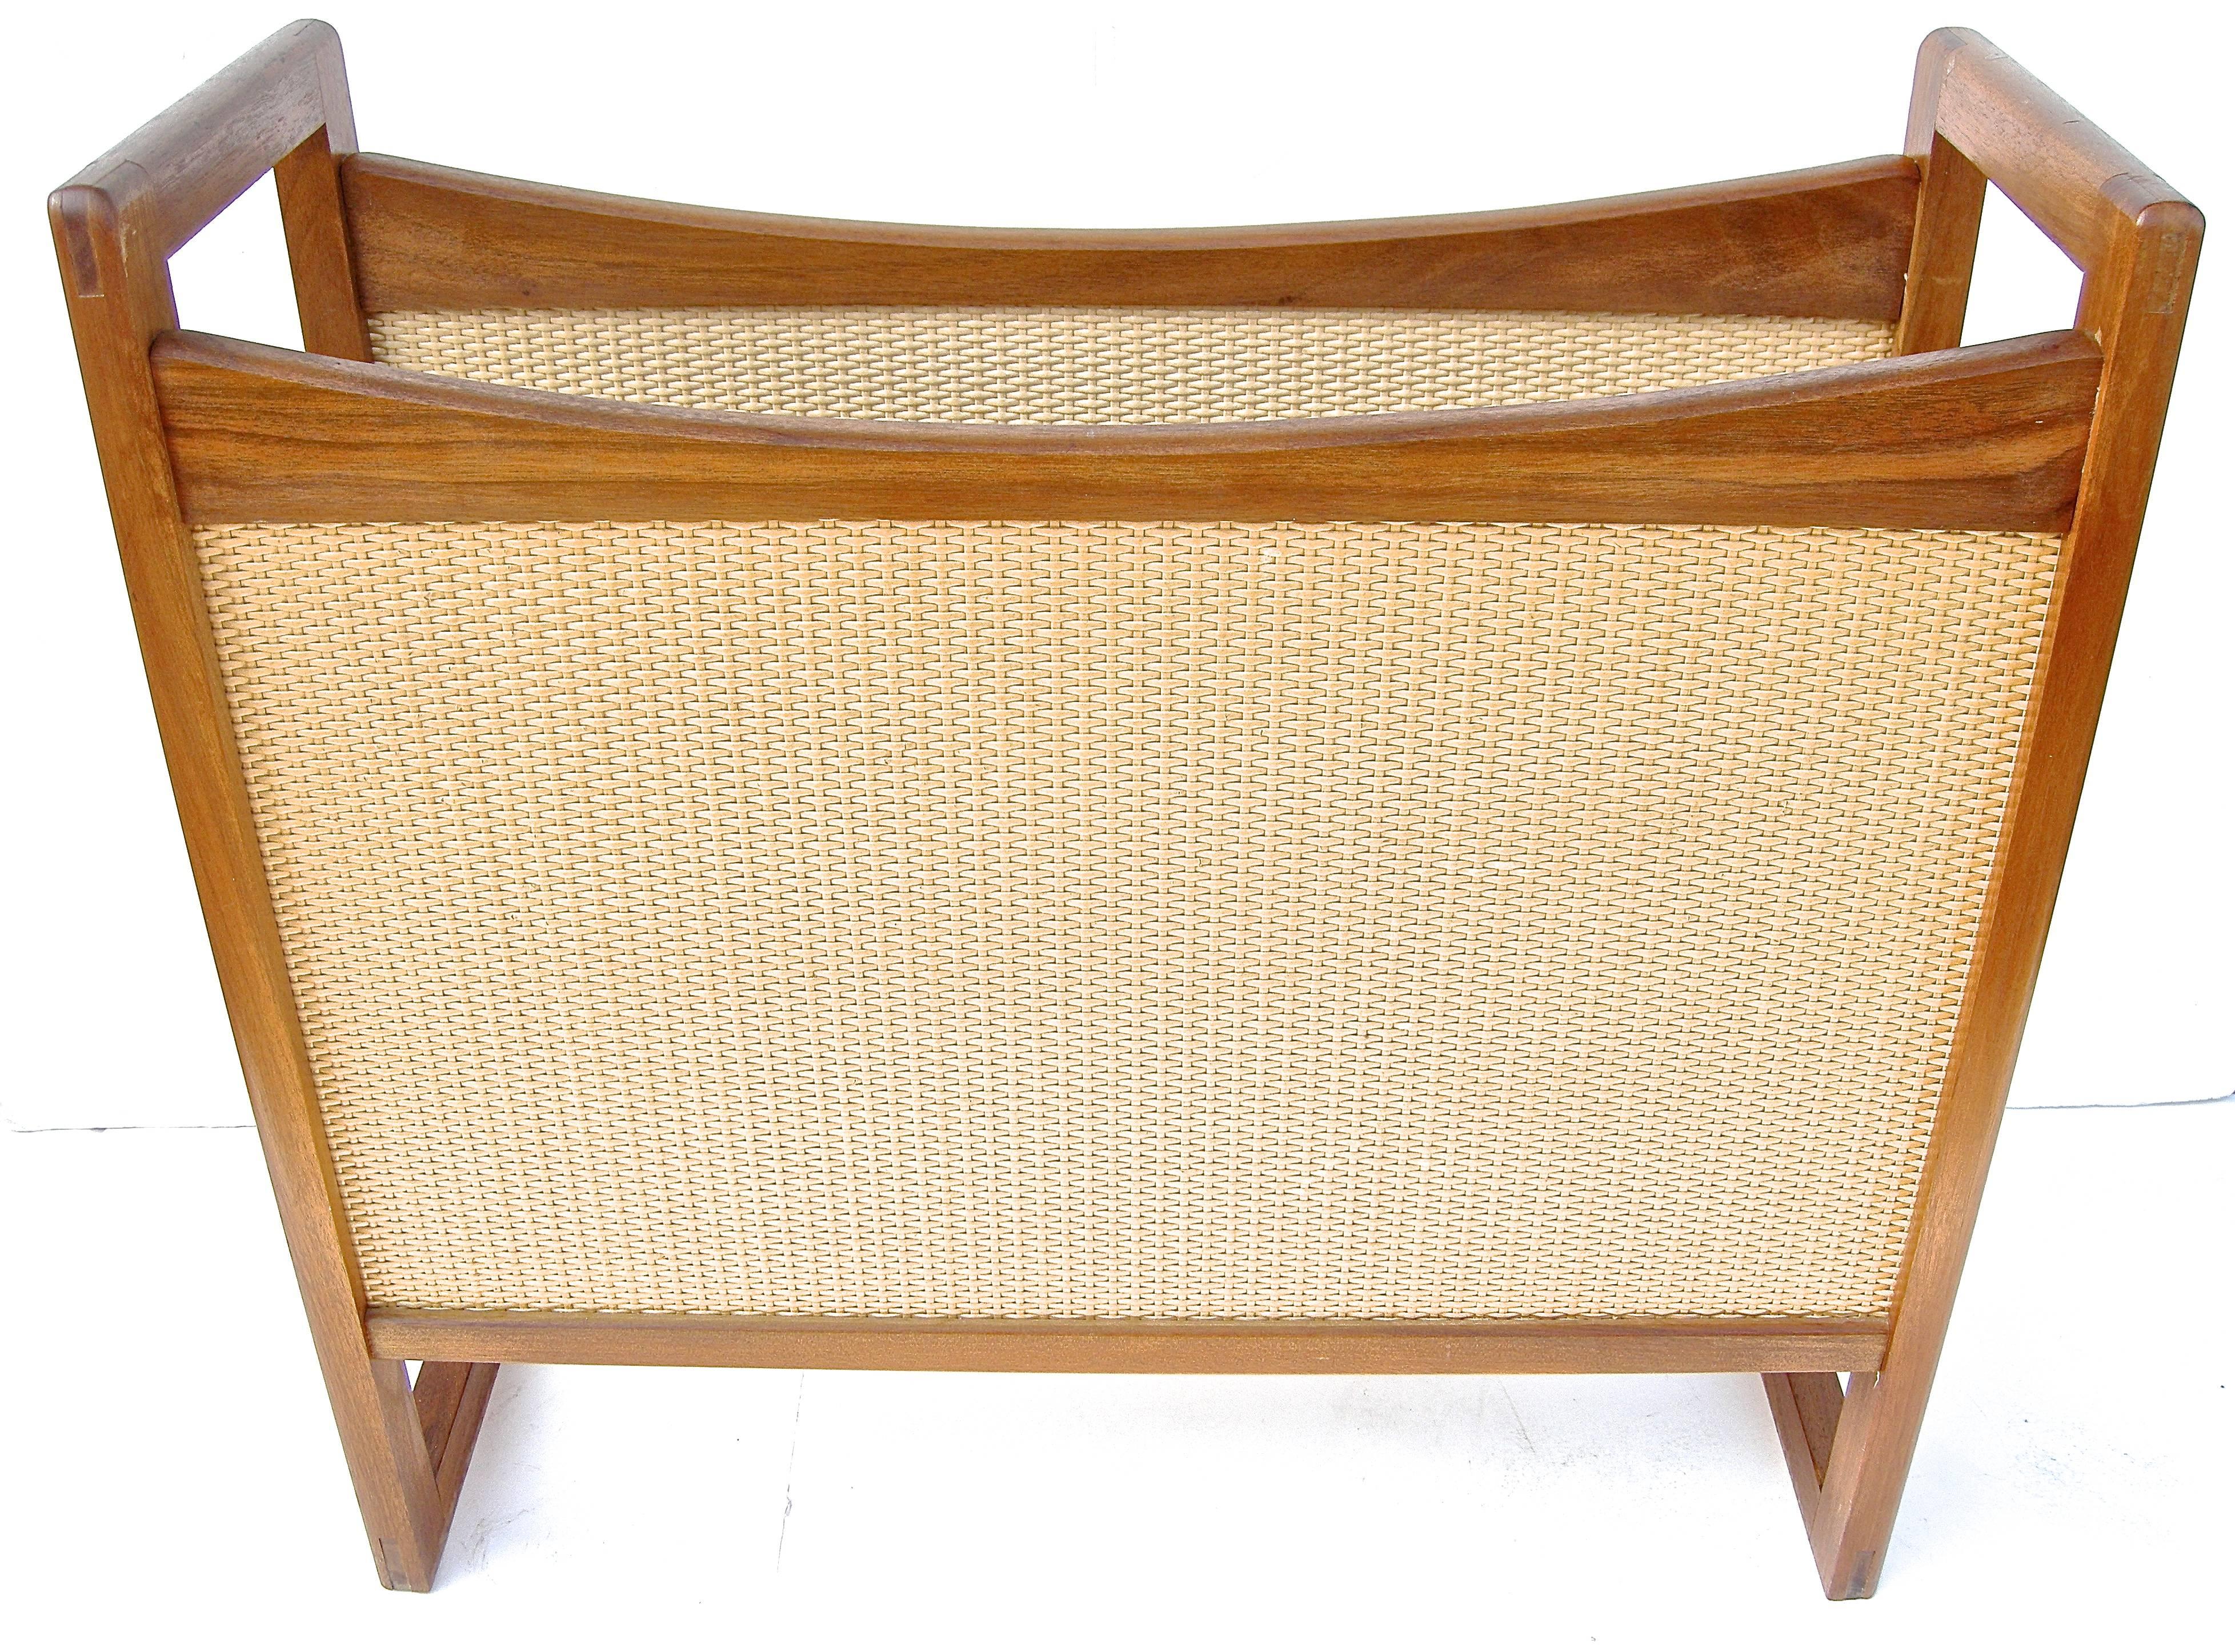 Classy, vintage, Danish modern periodicals holder. Sculptural wooden construction with eye-catching, tightly woven wicker side panels.